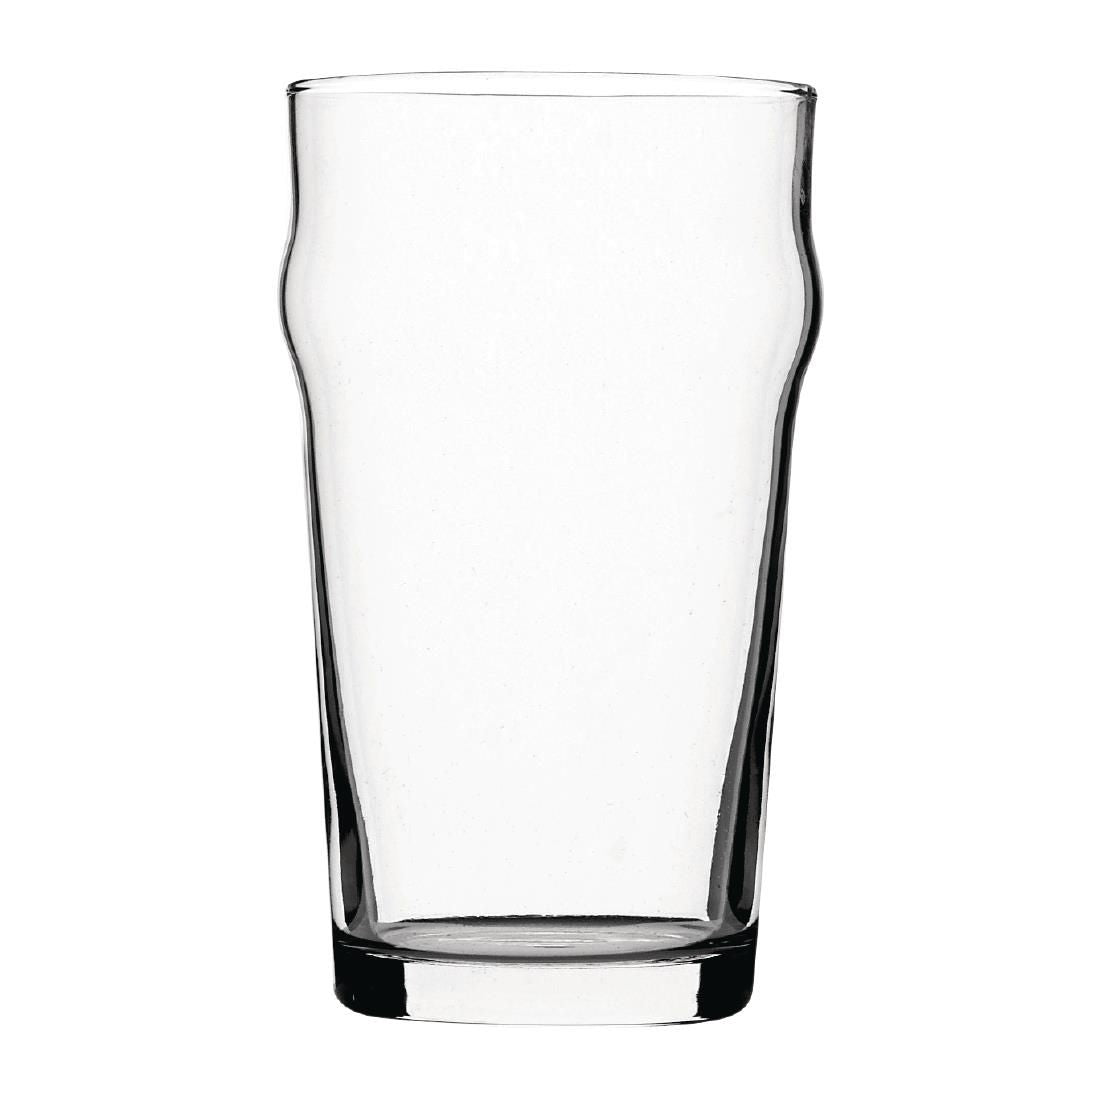 DB554 Utopia Nonic Beer Glasses 570ml CE Marked (Pack of 48) JD Catering Equipment Solutions Ltd